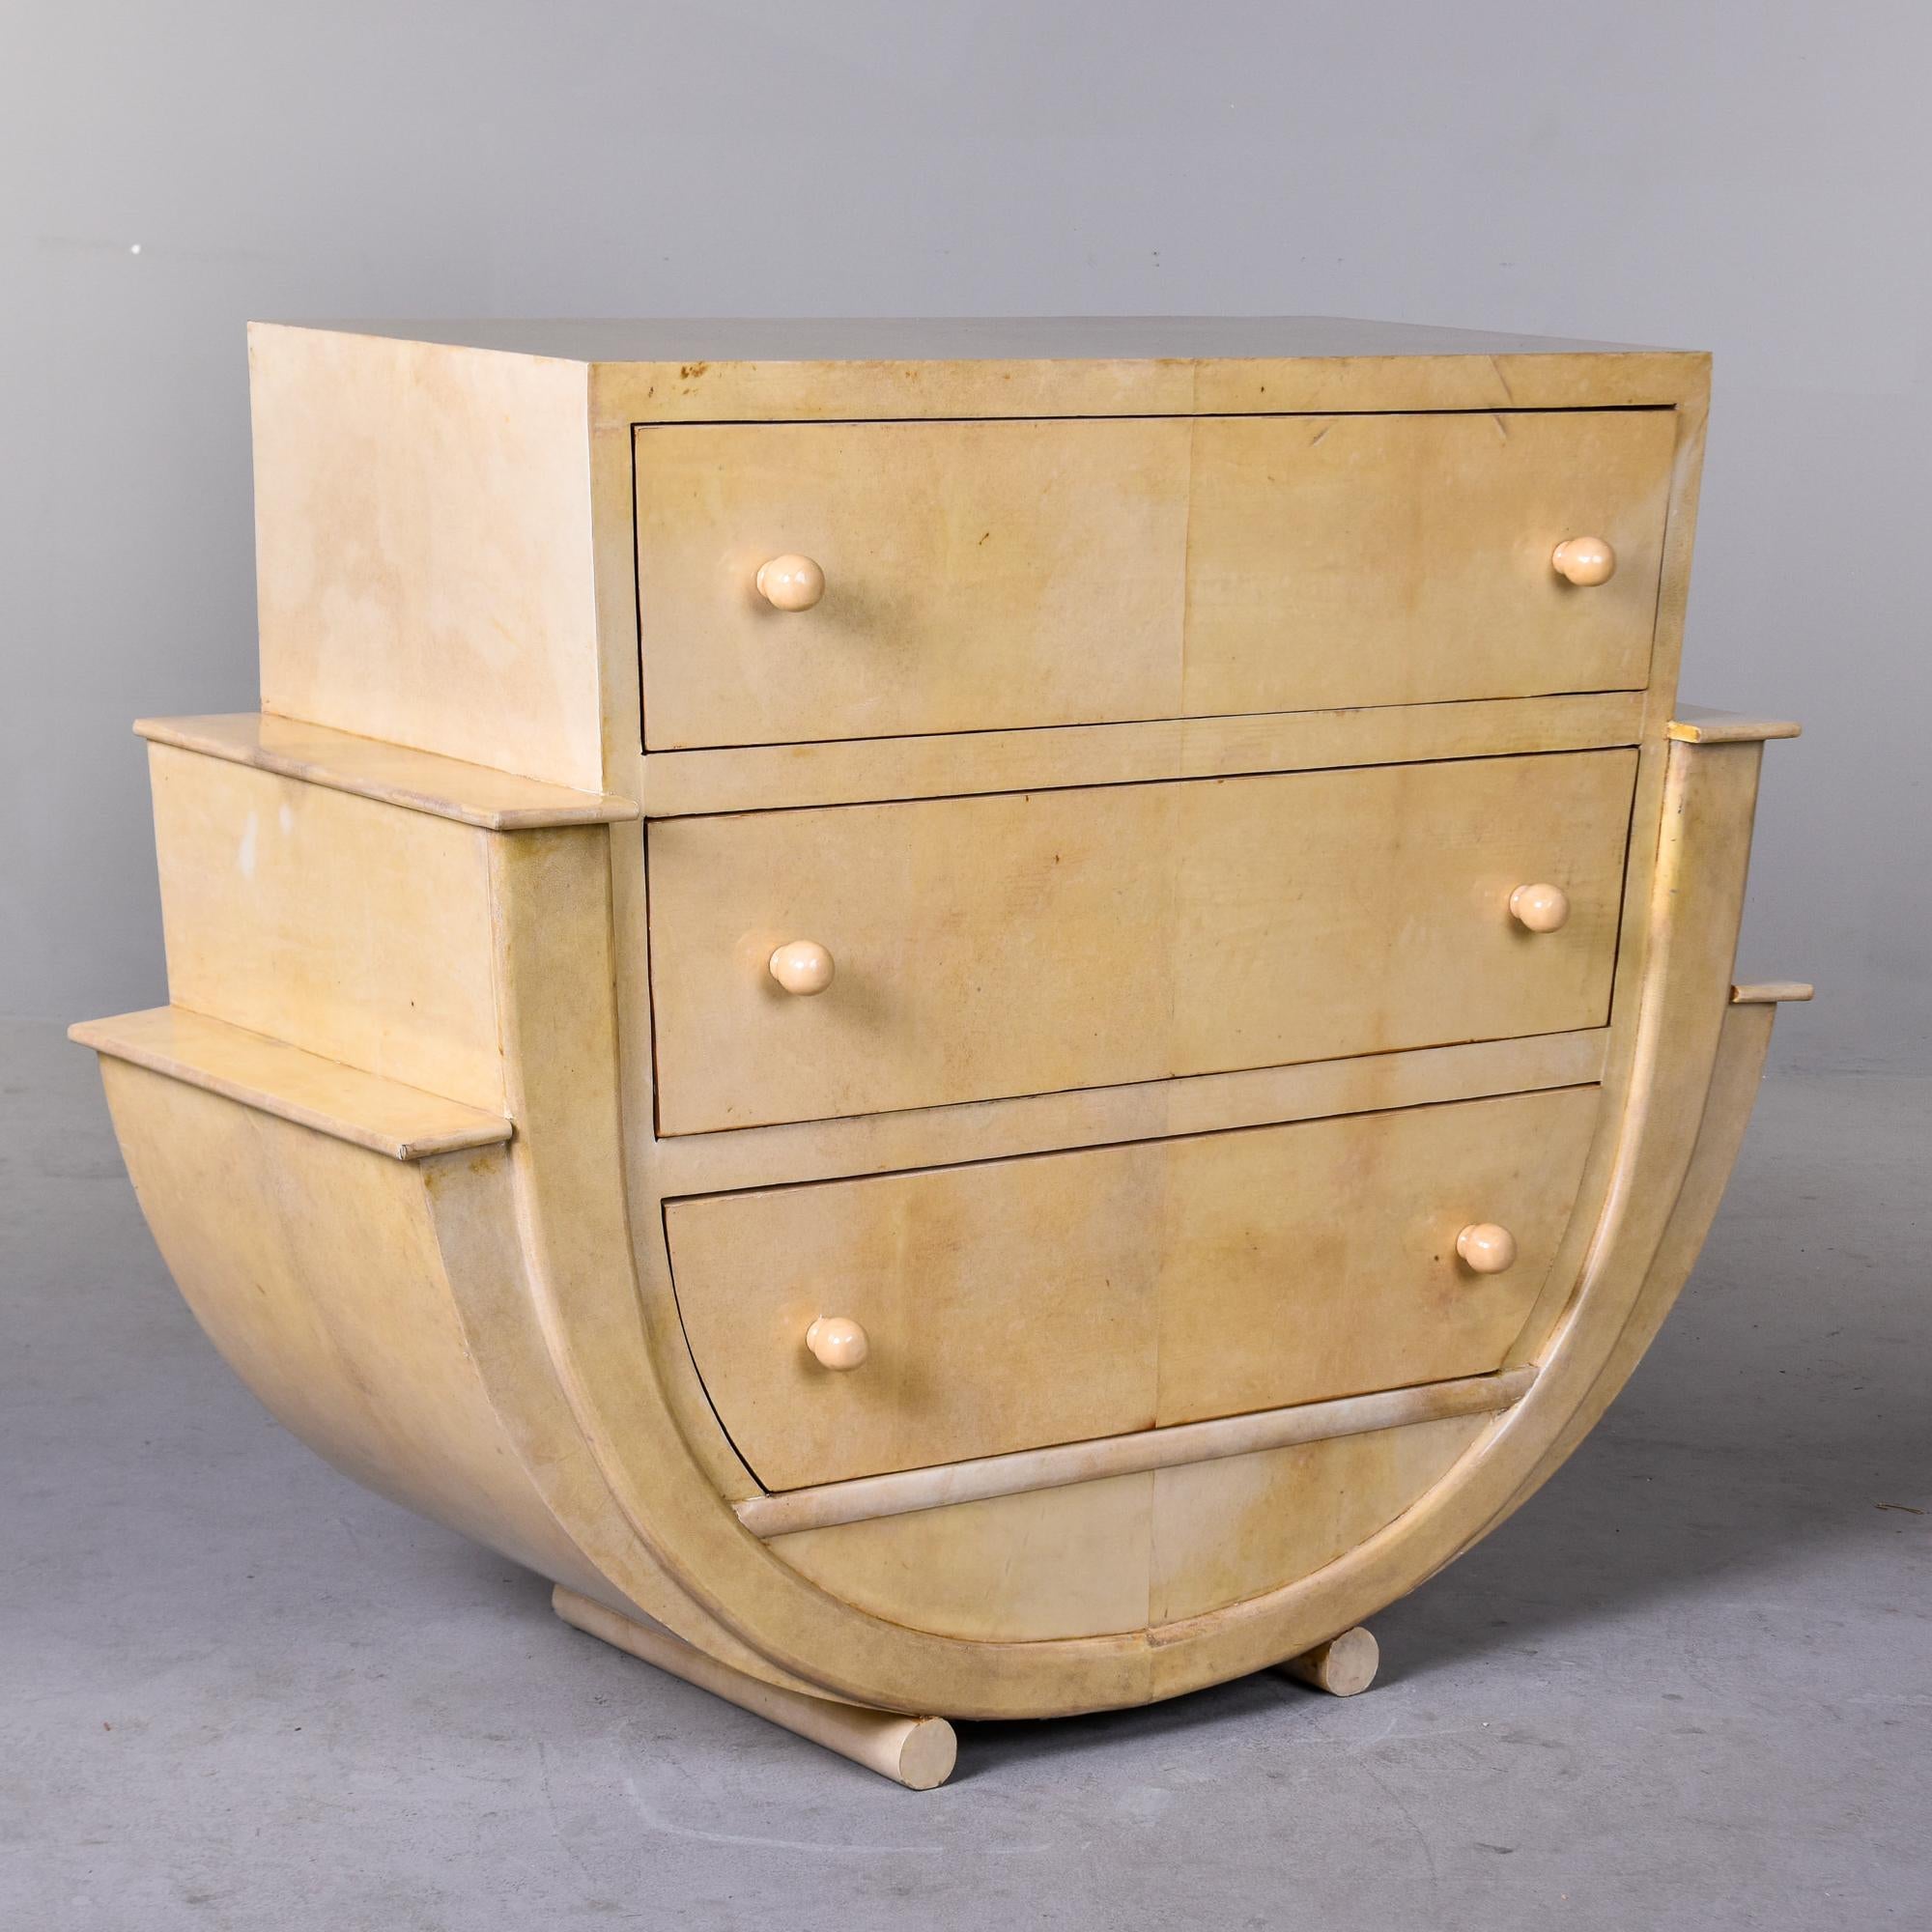 Found in Italy, this circa 1980s chest has great Art Deco style and lines. Three drawer chest with a curved, stepped base on parchment-covered dowel legs. Drawers have rounded pulls. Unknown maker. Overall very good vintage condition with minor